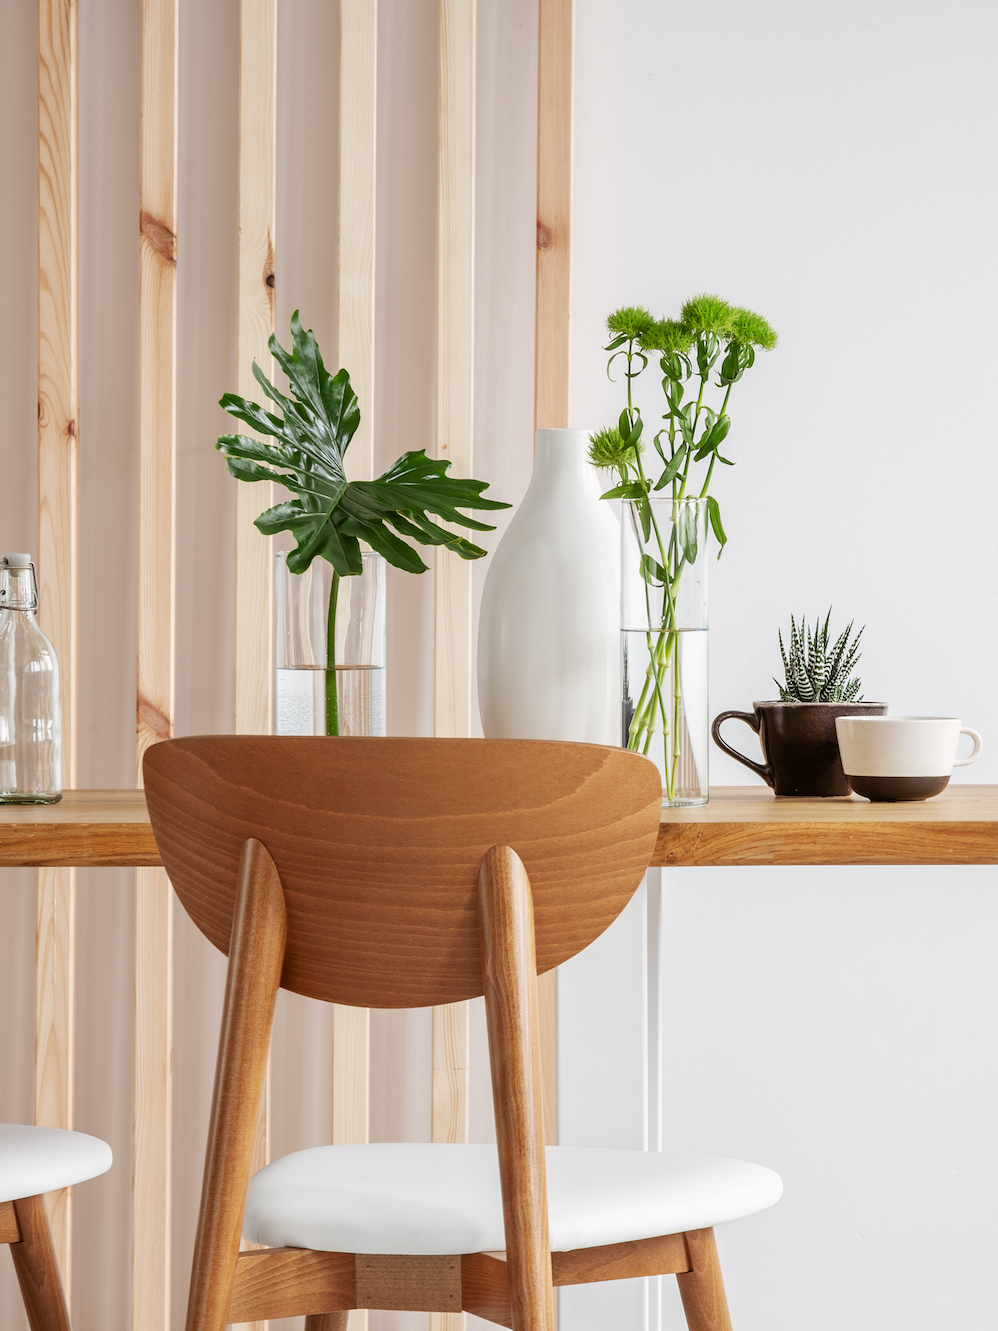 Green plants in small vases on long wooden dining table in bright interior